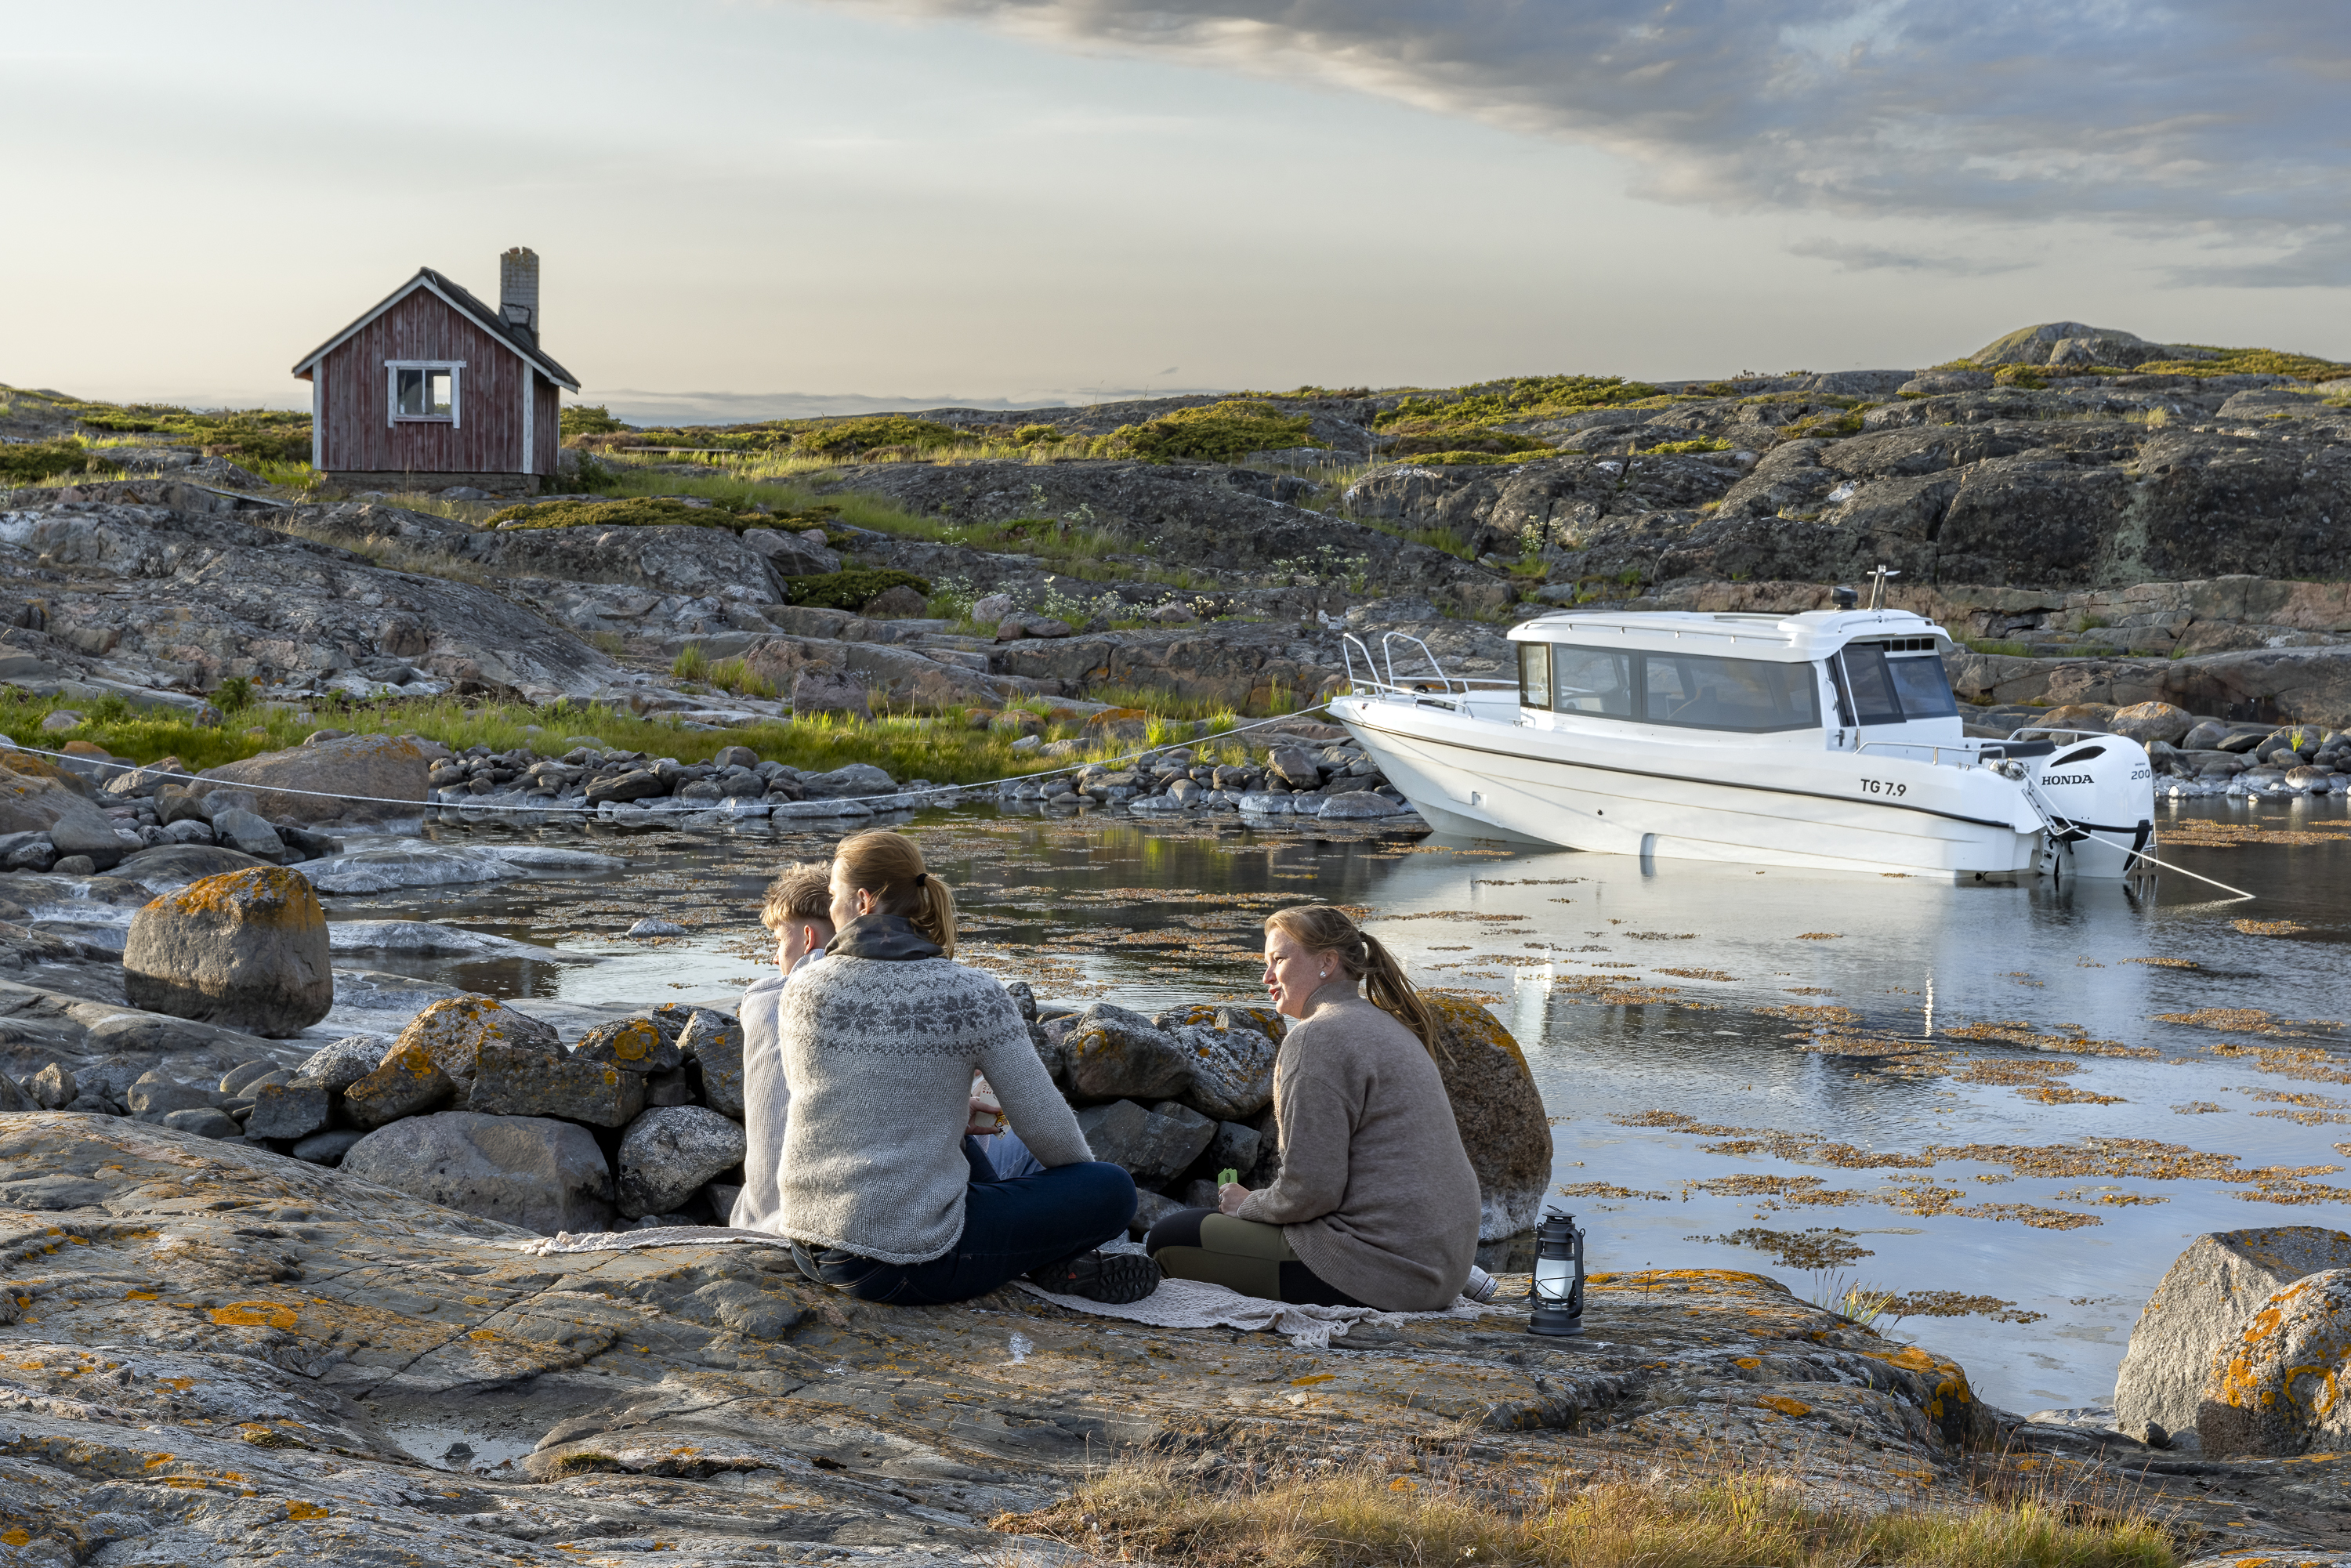 Three persons are spending time on low cliff in a natural harbor. The TG 7.9 cabin boats is anchored in the background.